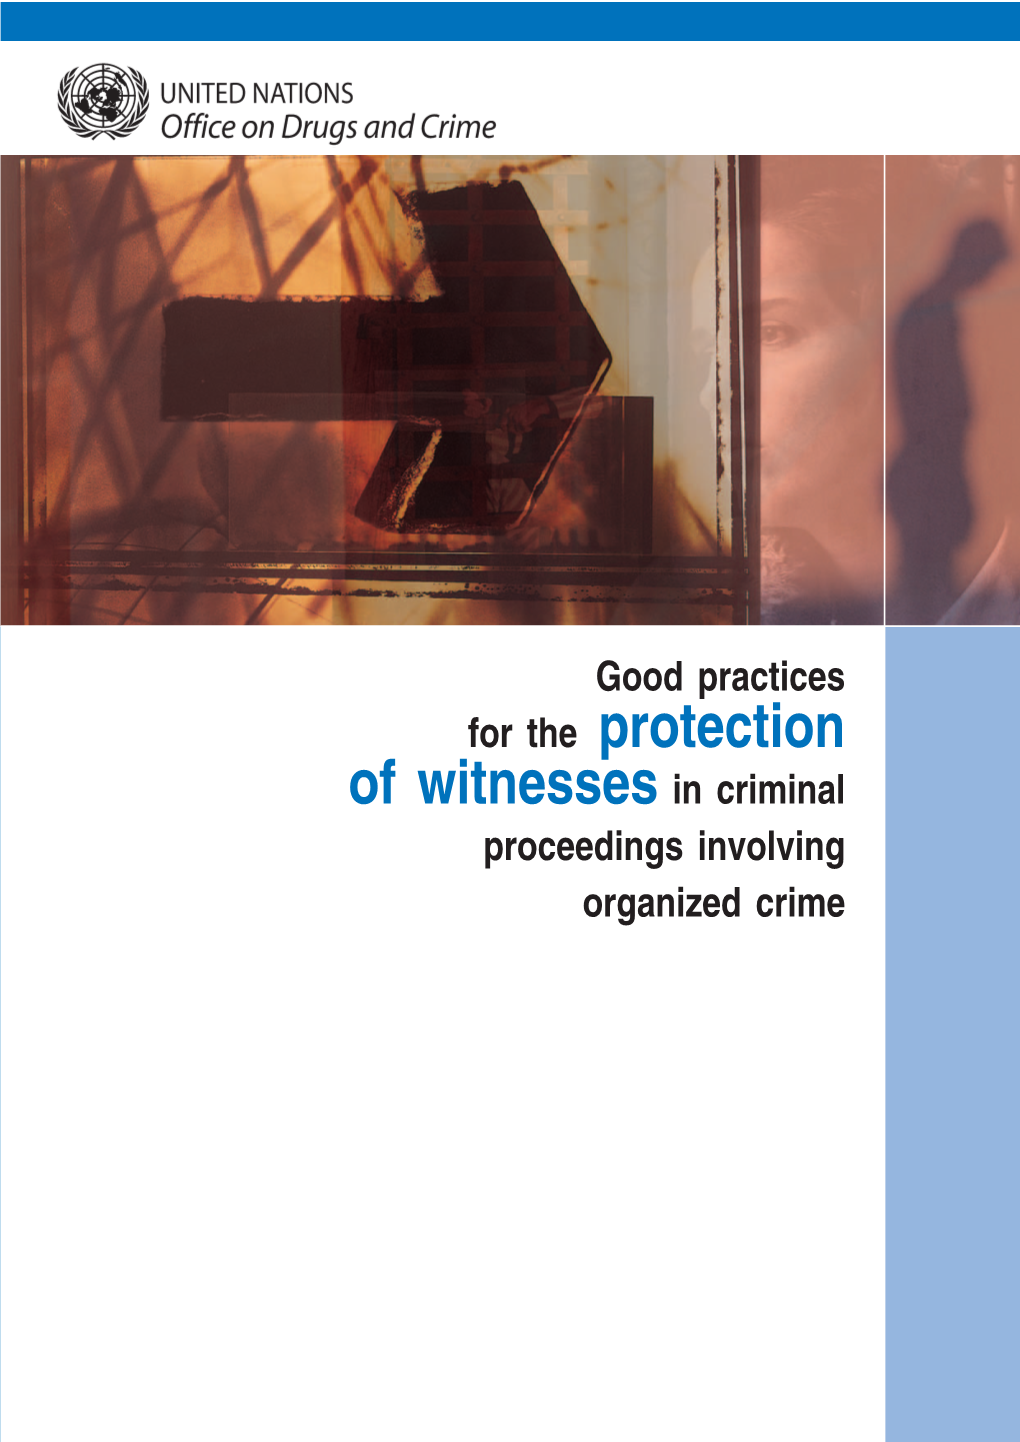 UNODC Good Practices for the Protection of Witnesses in Criminal